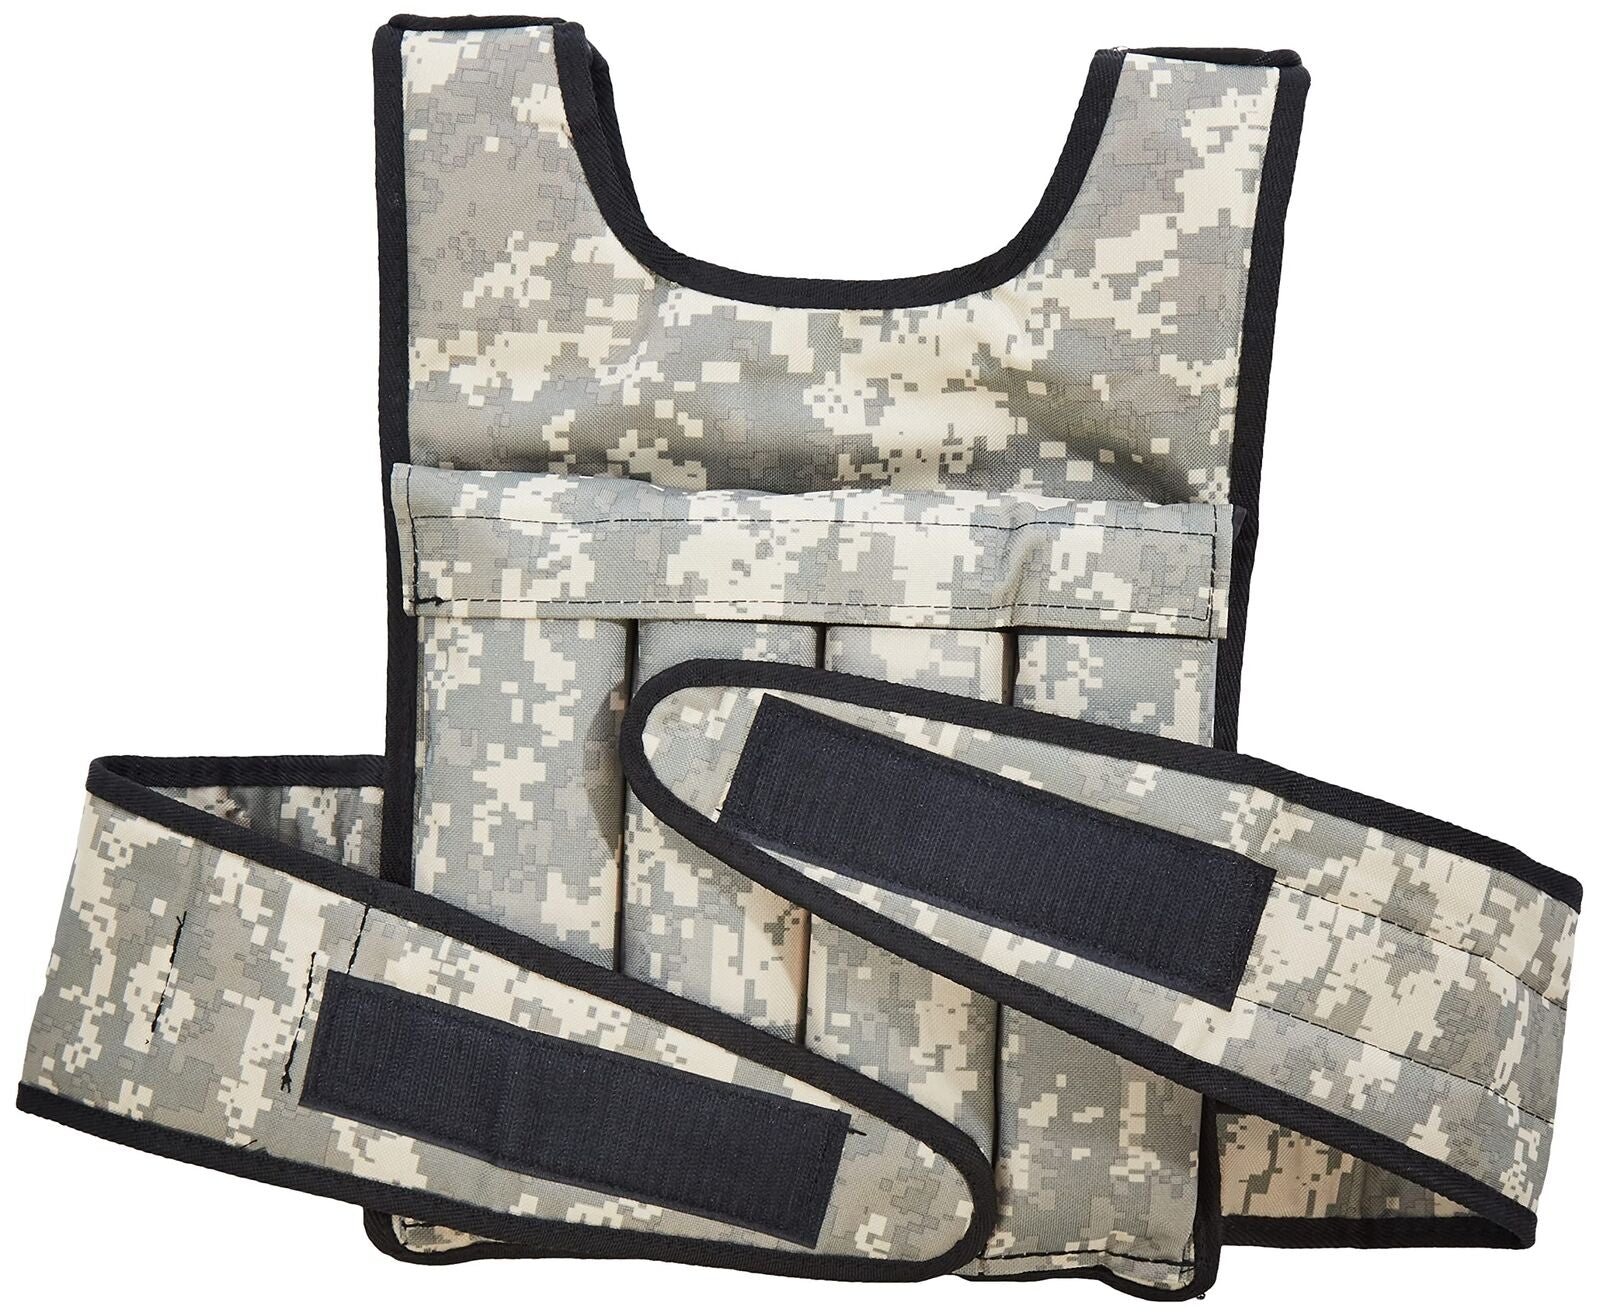 Compact, Adjustable Weighted Vest with Shoulder Pads Options